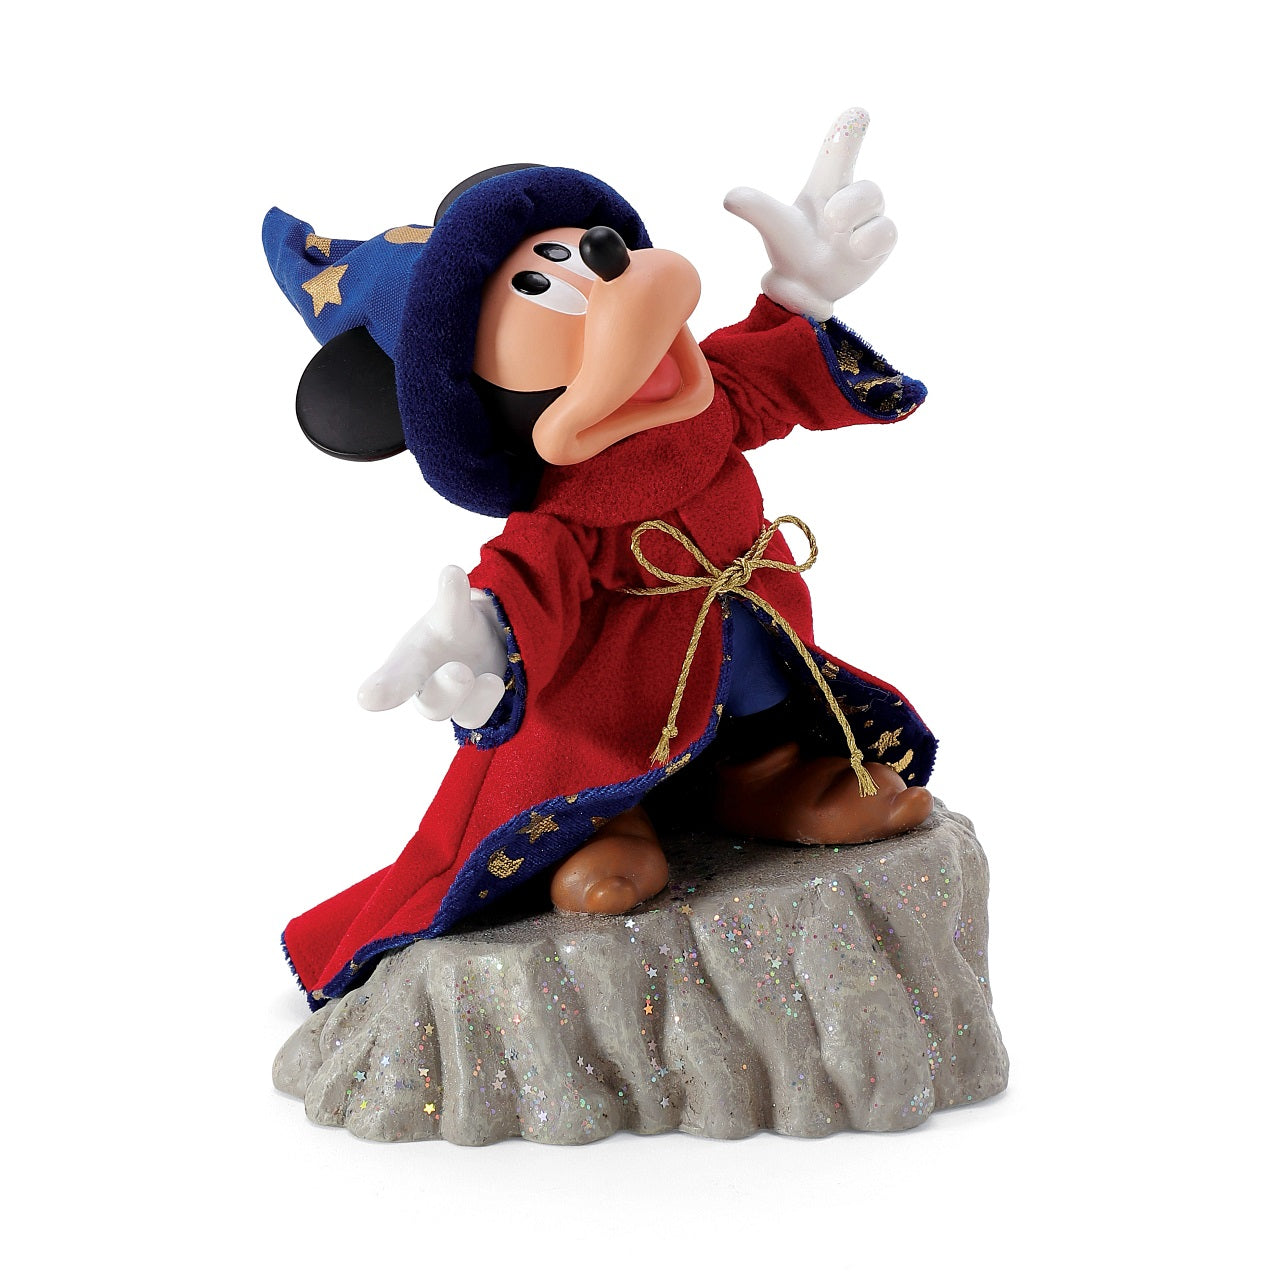 Department 56 Possible Dreams Sorcerer Mickey  Dressed in a Clothtique robe with metallic printed velour, this Possible Dreams Sorcerer Mickey comes to life. Commemorating the 80th Anniversary of Fantasia, Mickey reinacts one of the iconic scenes from the film.